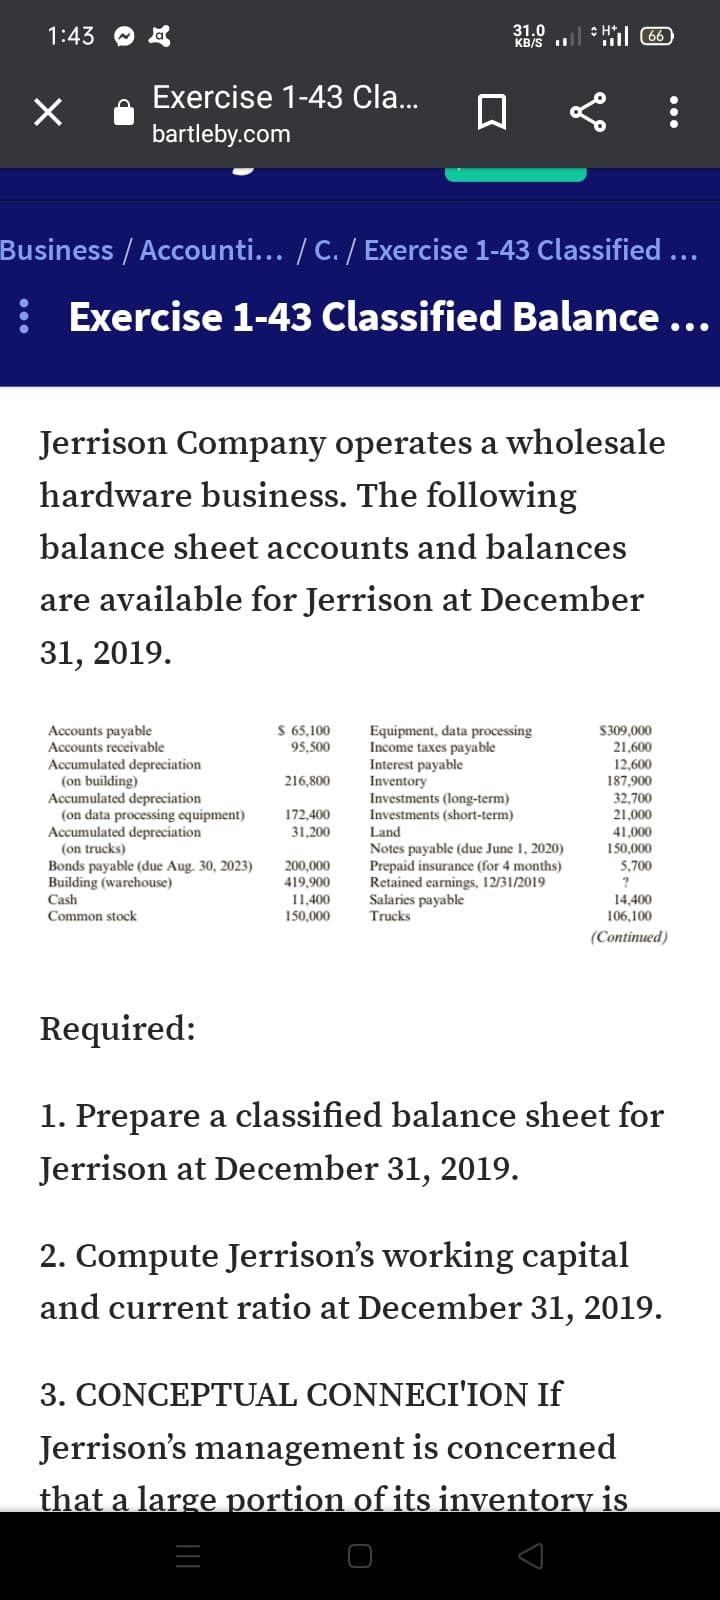 1:43 O a
31.0
KB/S II
* Hil 66
Exercise 1-43 Cla...
bartleby.com
Business / Accounti... / C. / Exercise 1-43 Classified ...
: Exercise 1-43 Classified Balance...
•..
Jerrison Company operates a wholesale
hardware business. The following
balance sheet accounts and balances
are available for Jerrison at December
31, 2019.
HE!
$ 65,100
Accounts payable
Accounts receivable
Equipment, data processing
Income taxes payable
Interest payable
Inventory
Investments (long-term)
Investments (short-term)
Land
Notes payable (due June 1, 2020)
Prepaid insurance (for 4 months)
Retained earnings, 12/31/2019
Salaries payable
Trucks
S309,000
21,600
12,600
187,900
95,500
Accumulated depreciation
(on building)
Accumulated depreciation
(on data processing equipment)
Accumulated depreciation
(on trucks)
Bonds payable (due Aug. 30, 2023)
Building (warehouse)
216,800
32,700
172,400
21,000
31,200
41,000
150,000
5,700
200,000
419.900
Cash
11,400
14,400
Common stock
150,000
106,100
(Continued)
Required:
1. Prepare a classified balance sheet for
Jerrison at December 31, 2019.
2. Compute Jerrison's working capital
and current ratio at December 31, 2019.
3. CONCEPTUAL CONNECI'ION If
Jerrison's management is concerned
that a large portion of its inventory is
